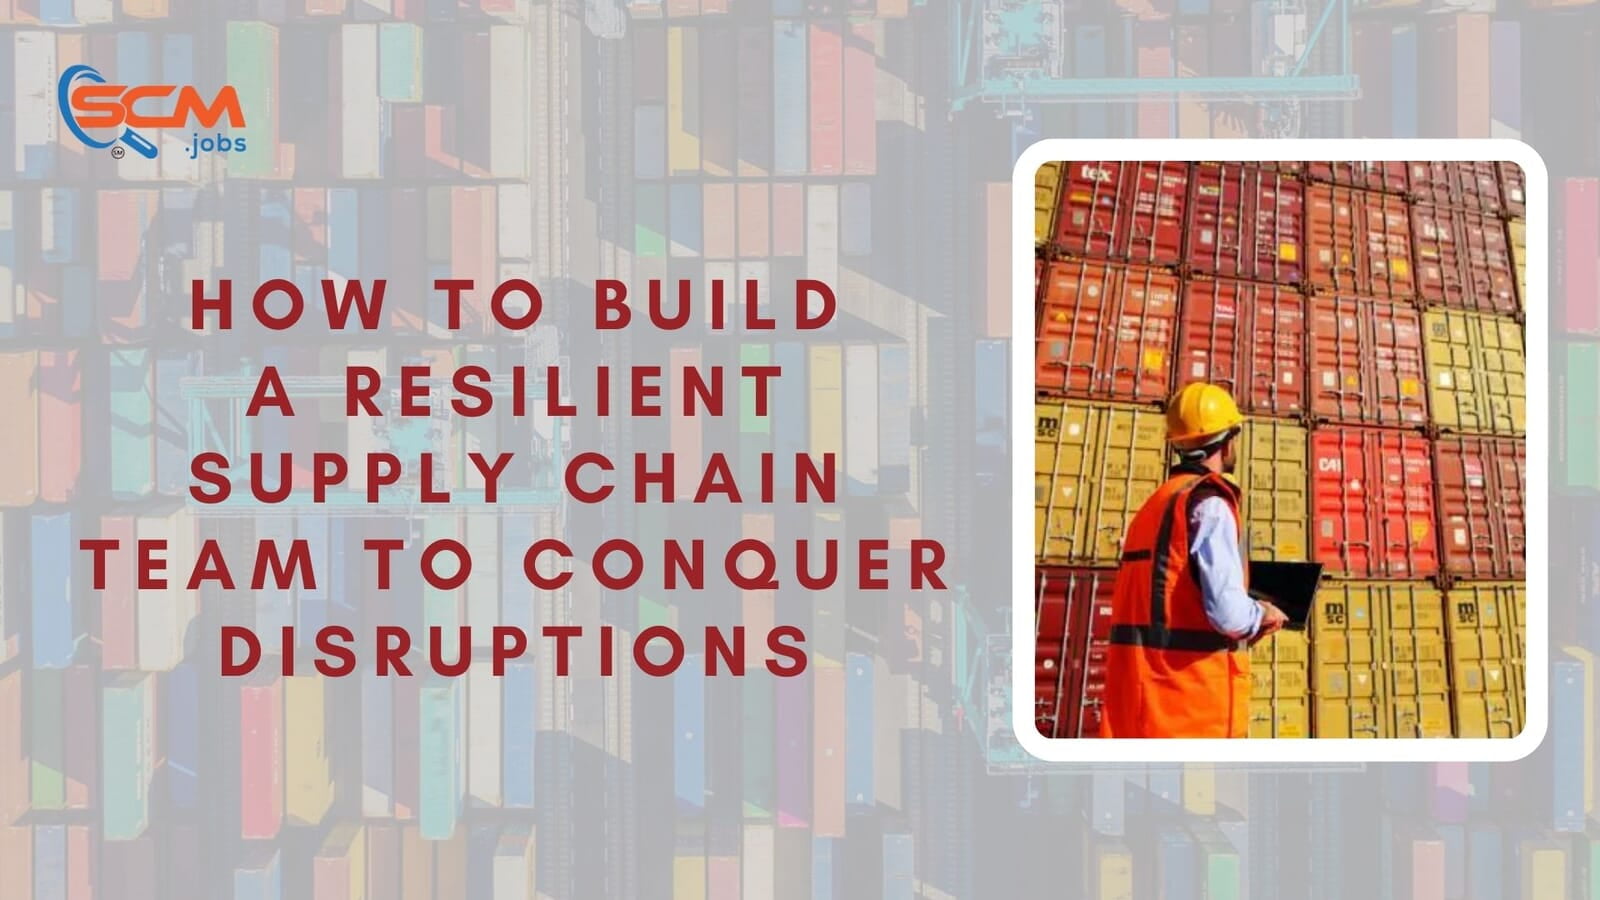 How to Build a Resilient Supply Chain Team to Conquer Disruptions